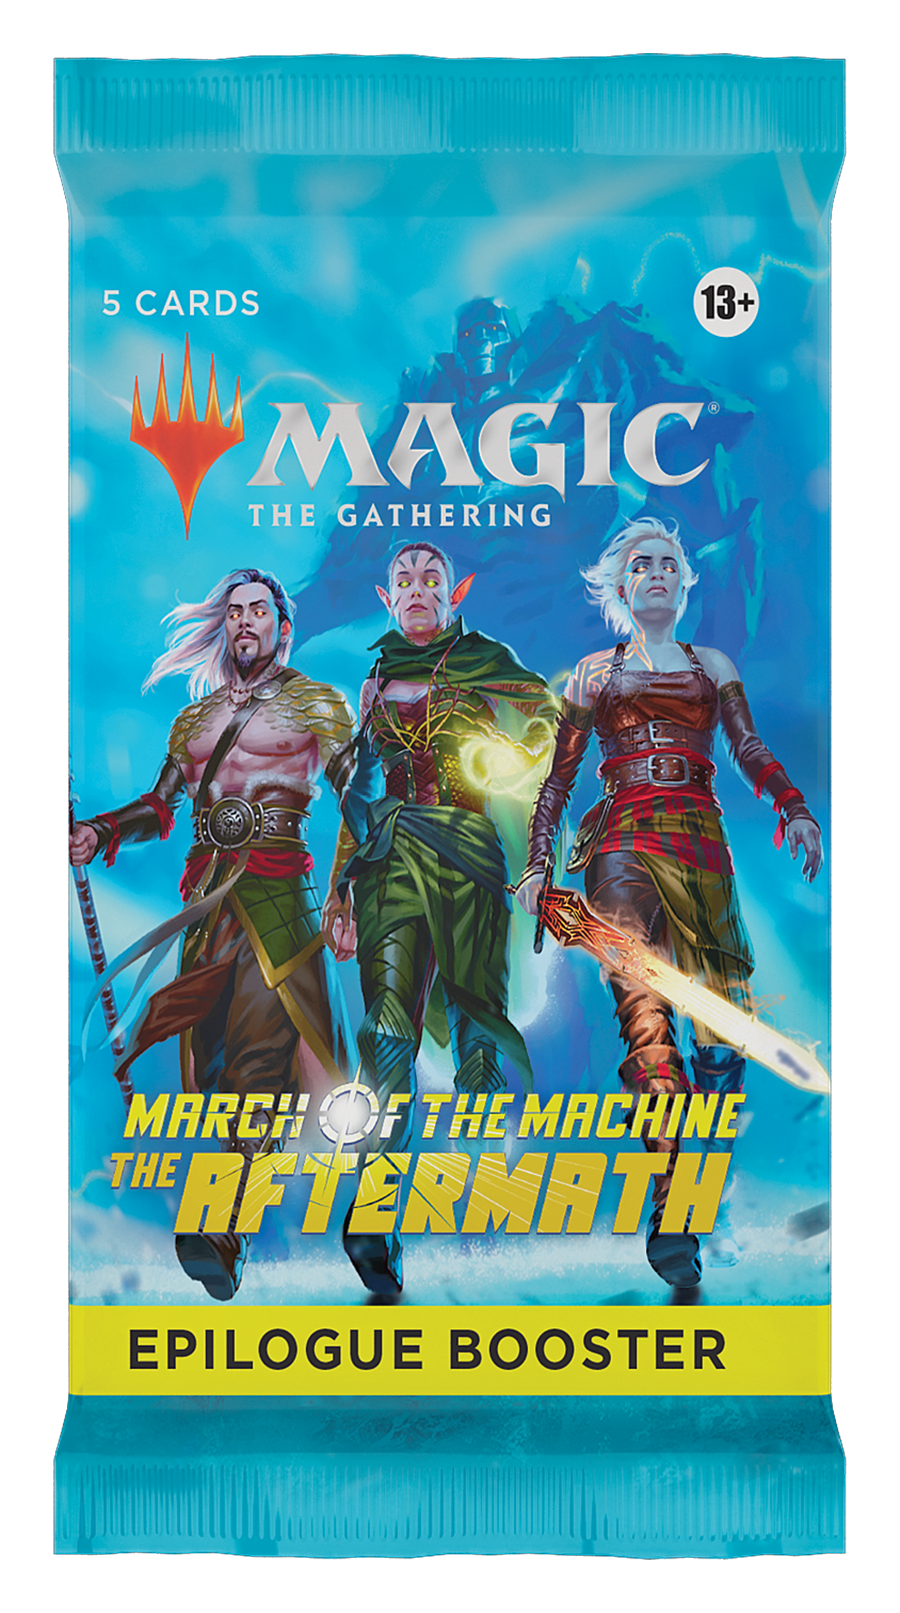 March of the Machine The Aftermath Epilogue Booster pack